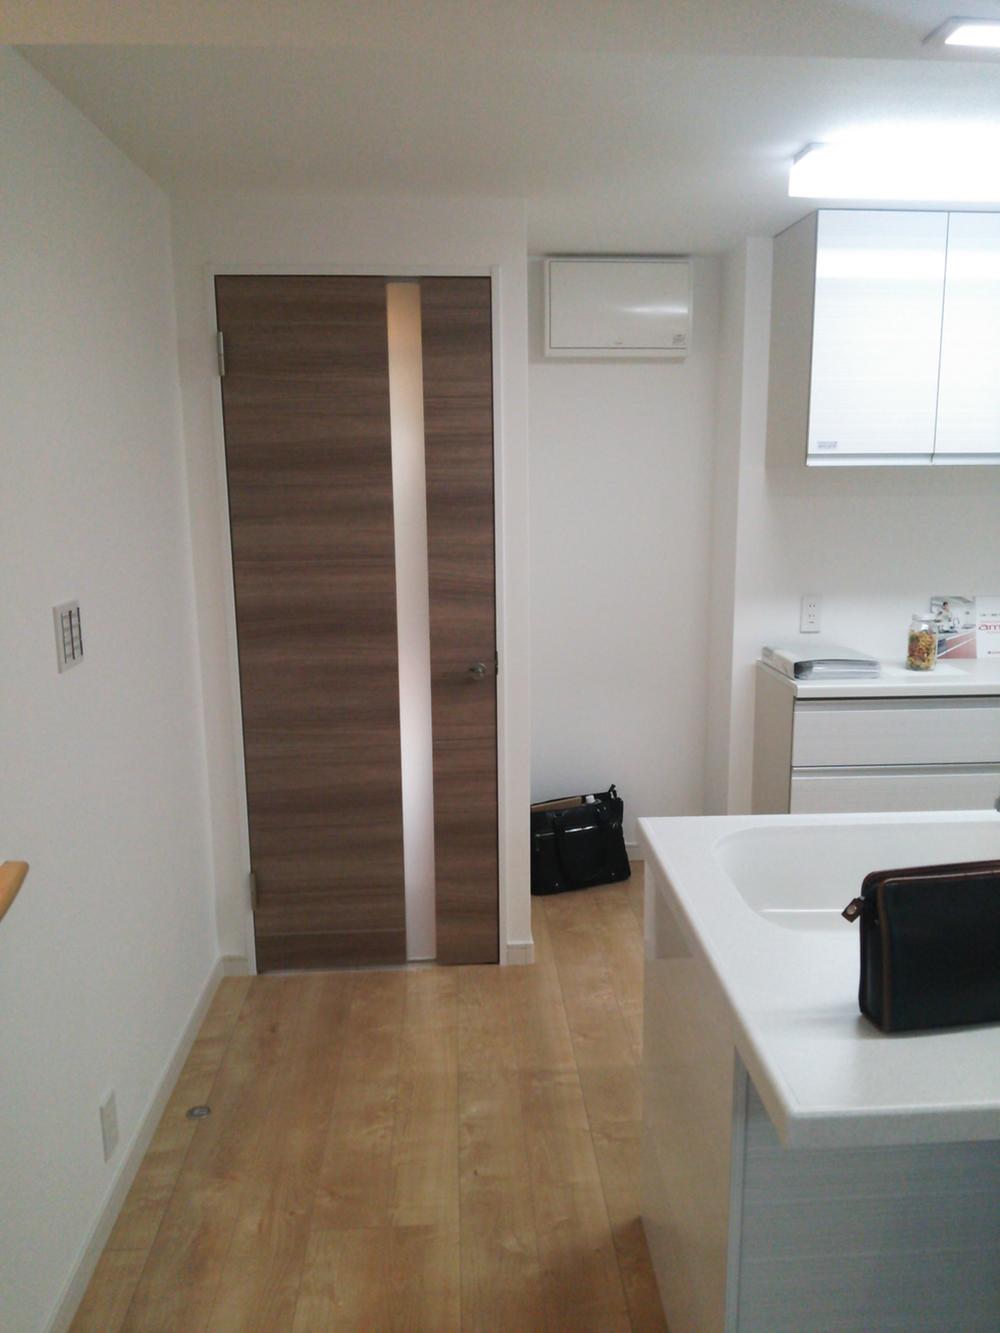 Same specifications photos (living). Fashion door will be the same goods.